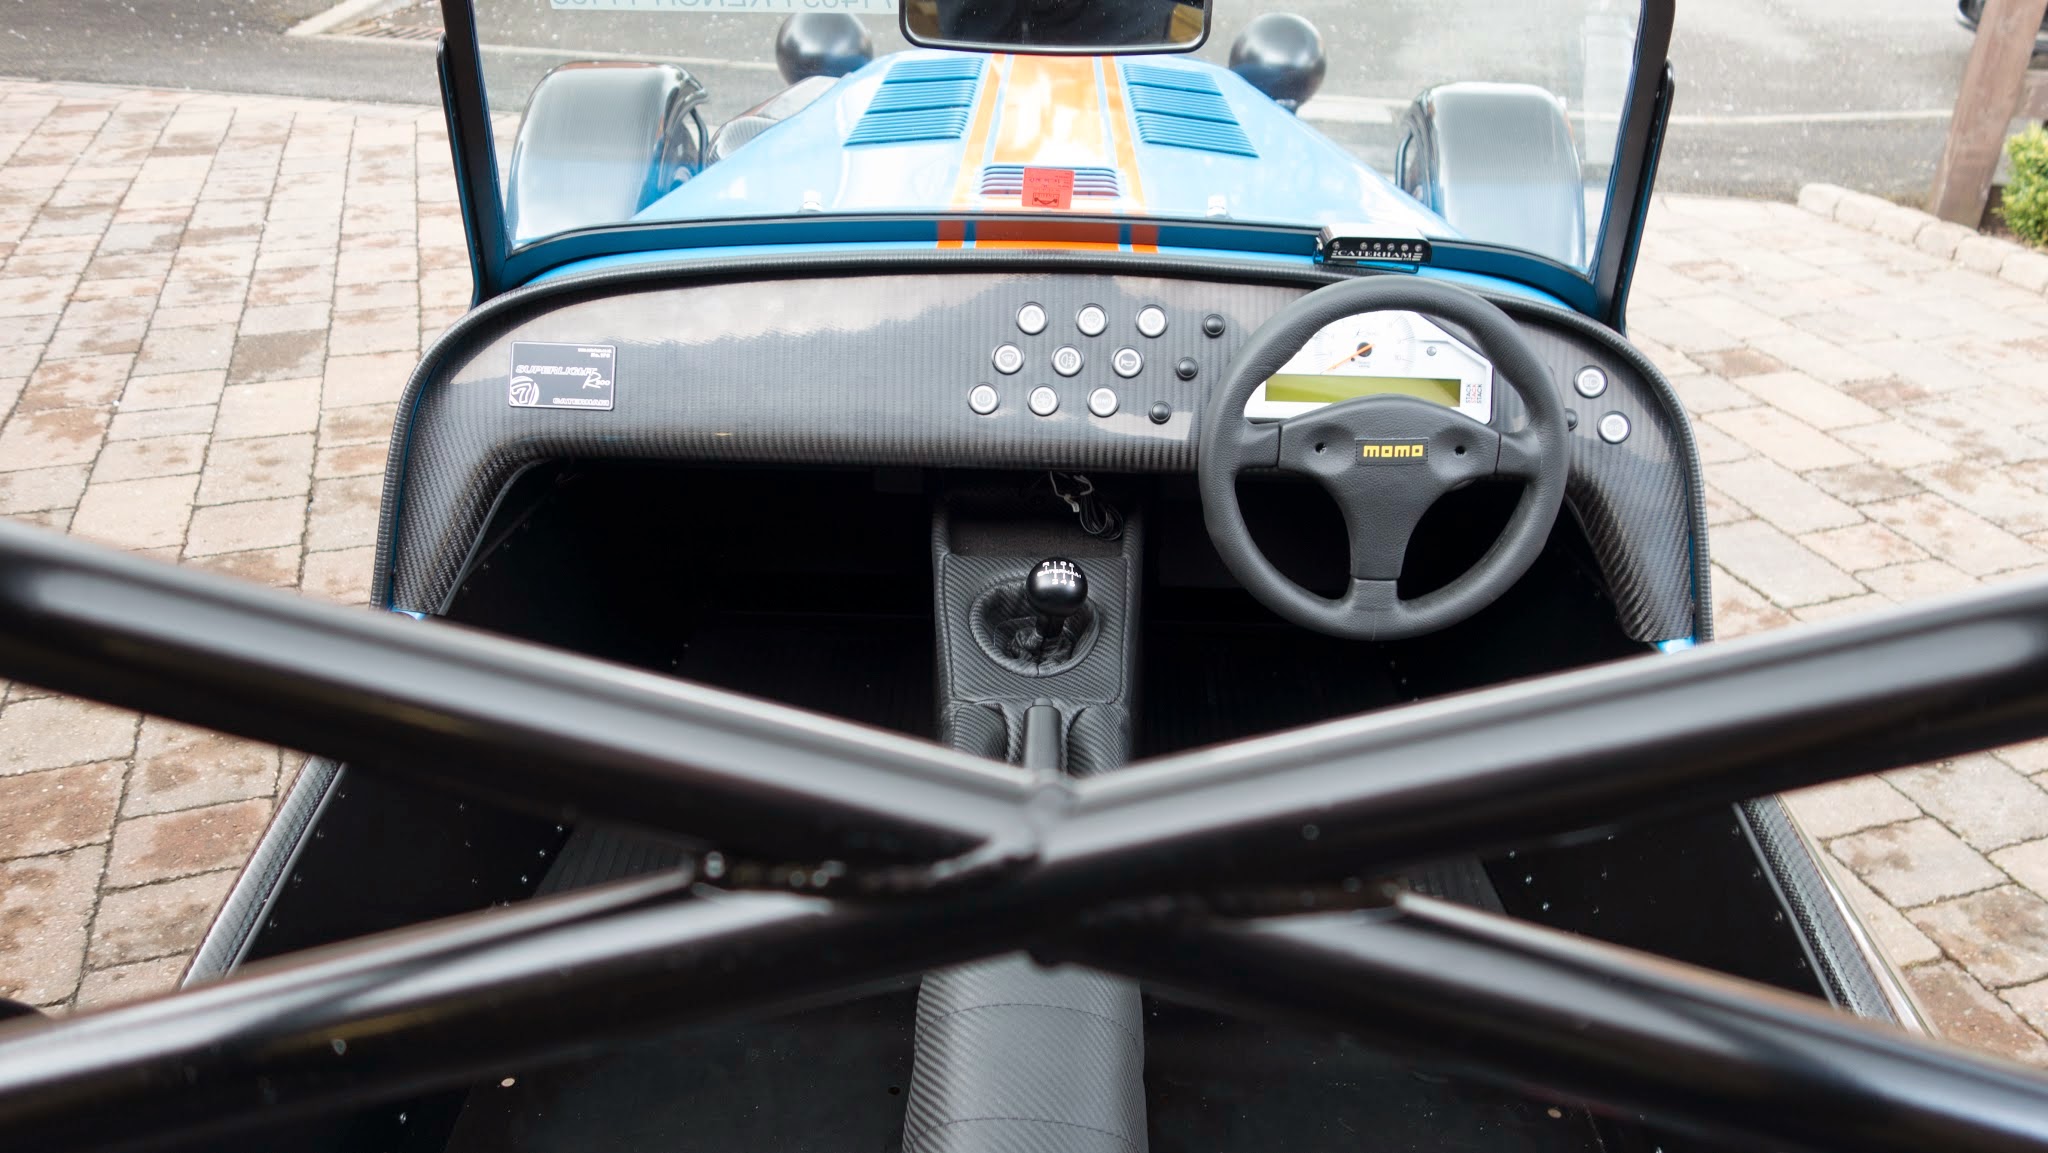 Overhead shot of interior with track day roll bar in foreground.